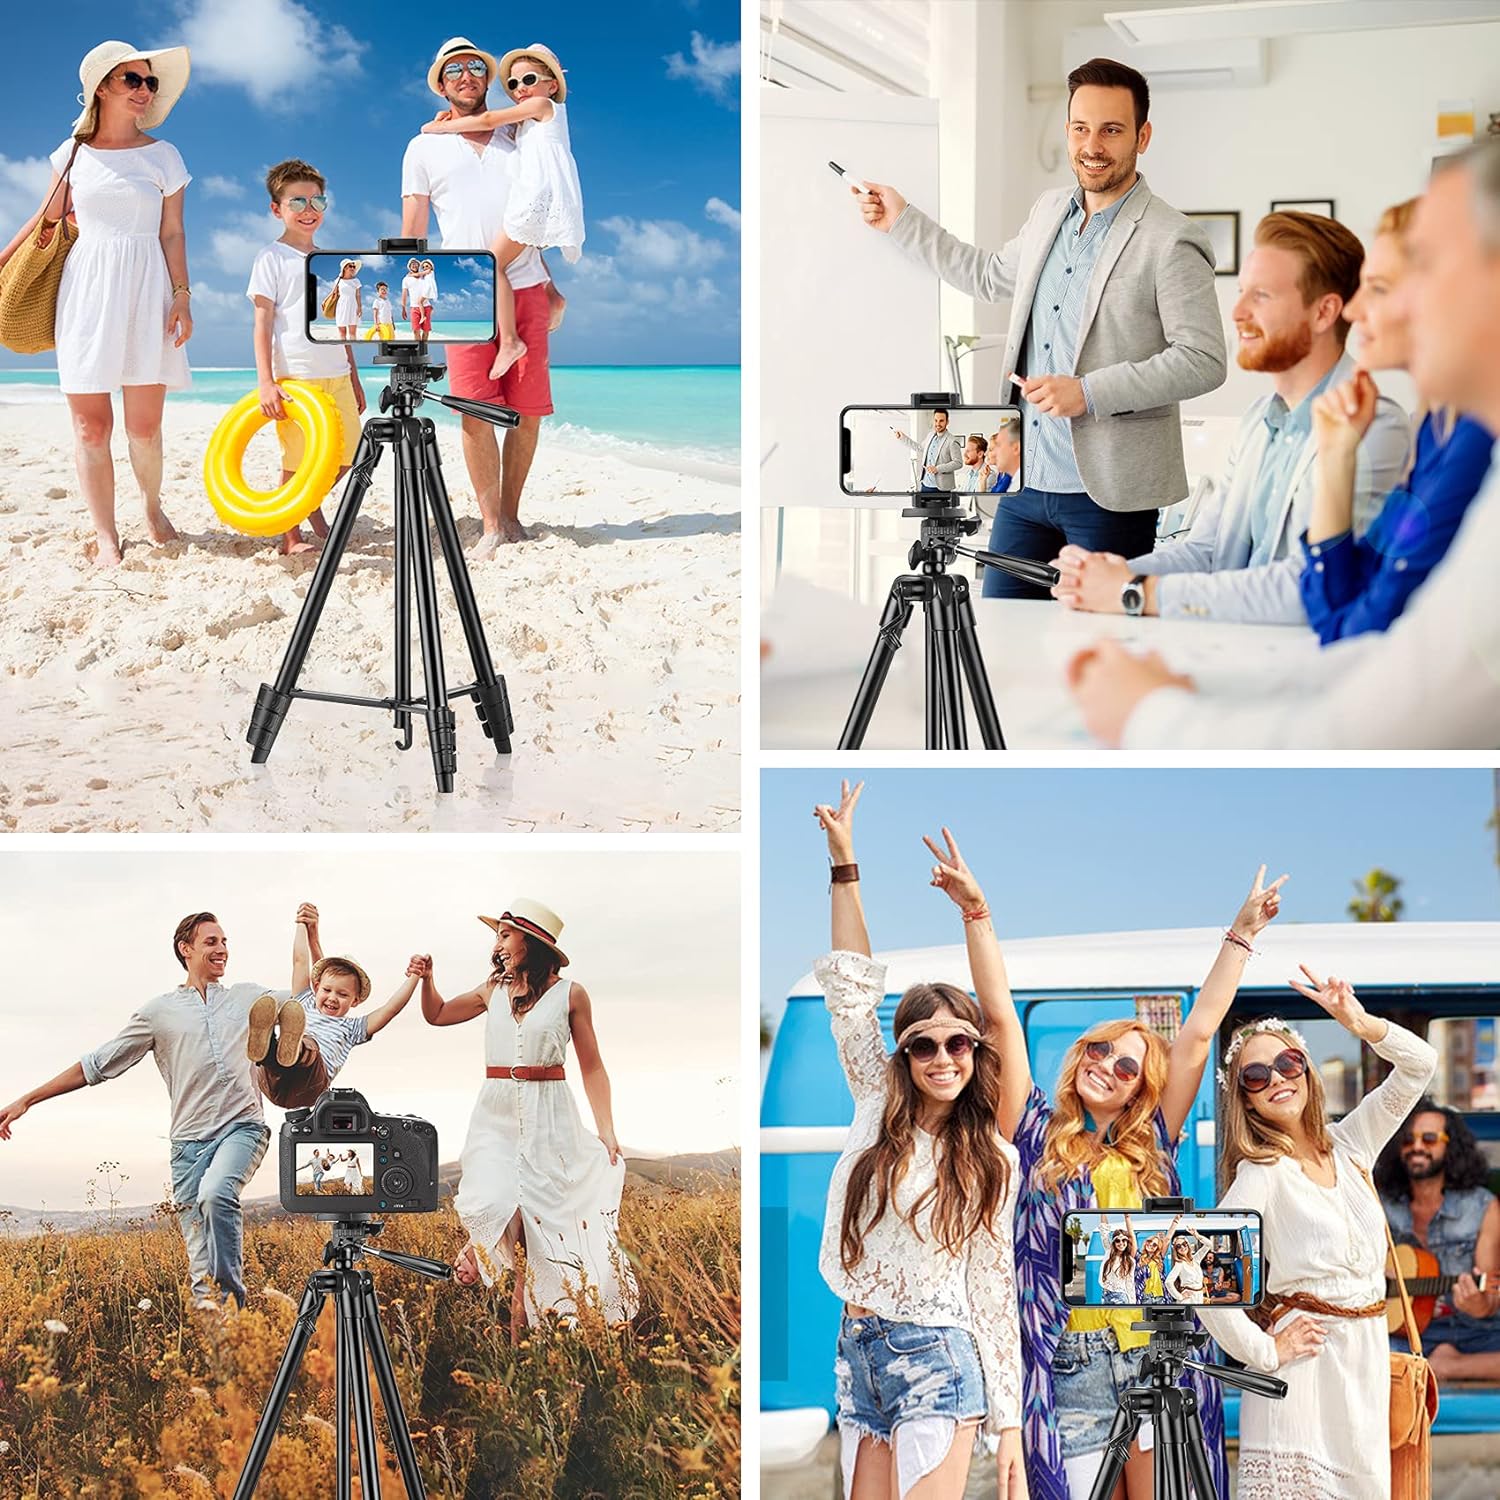 Eocean Tripod Flexible, 136cm Extendable Mobile Tripod Stand with Wireless Remote and Clip, Universal Aluminum Alloy Tripod for Video Recording, Selfie, Travel Camera Tripod Lightweight